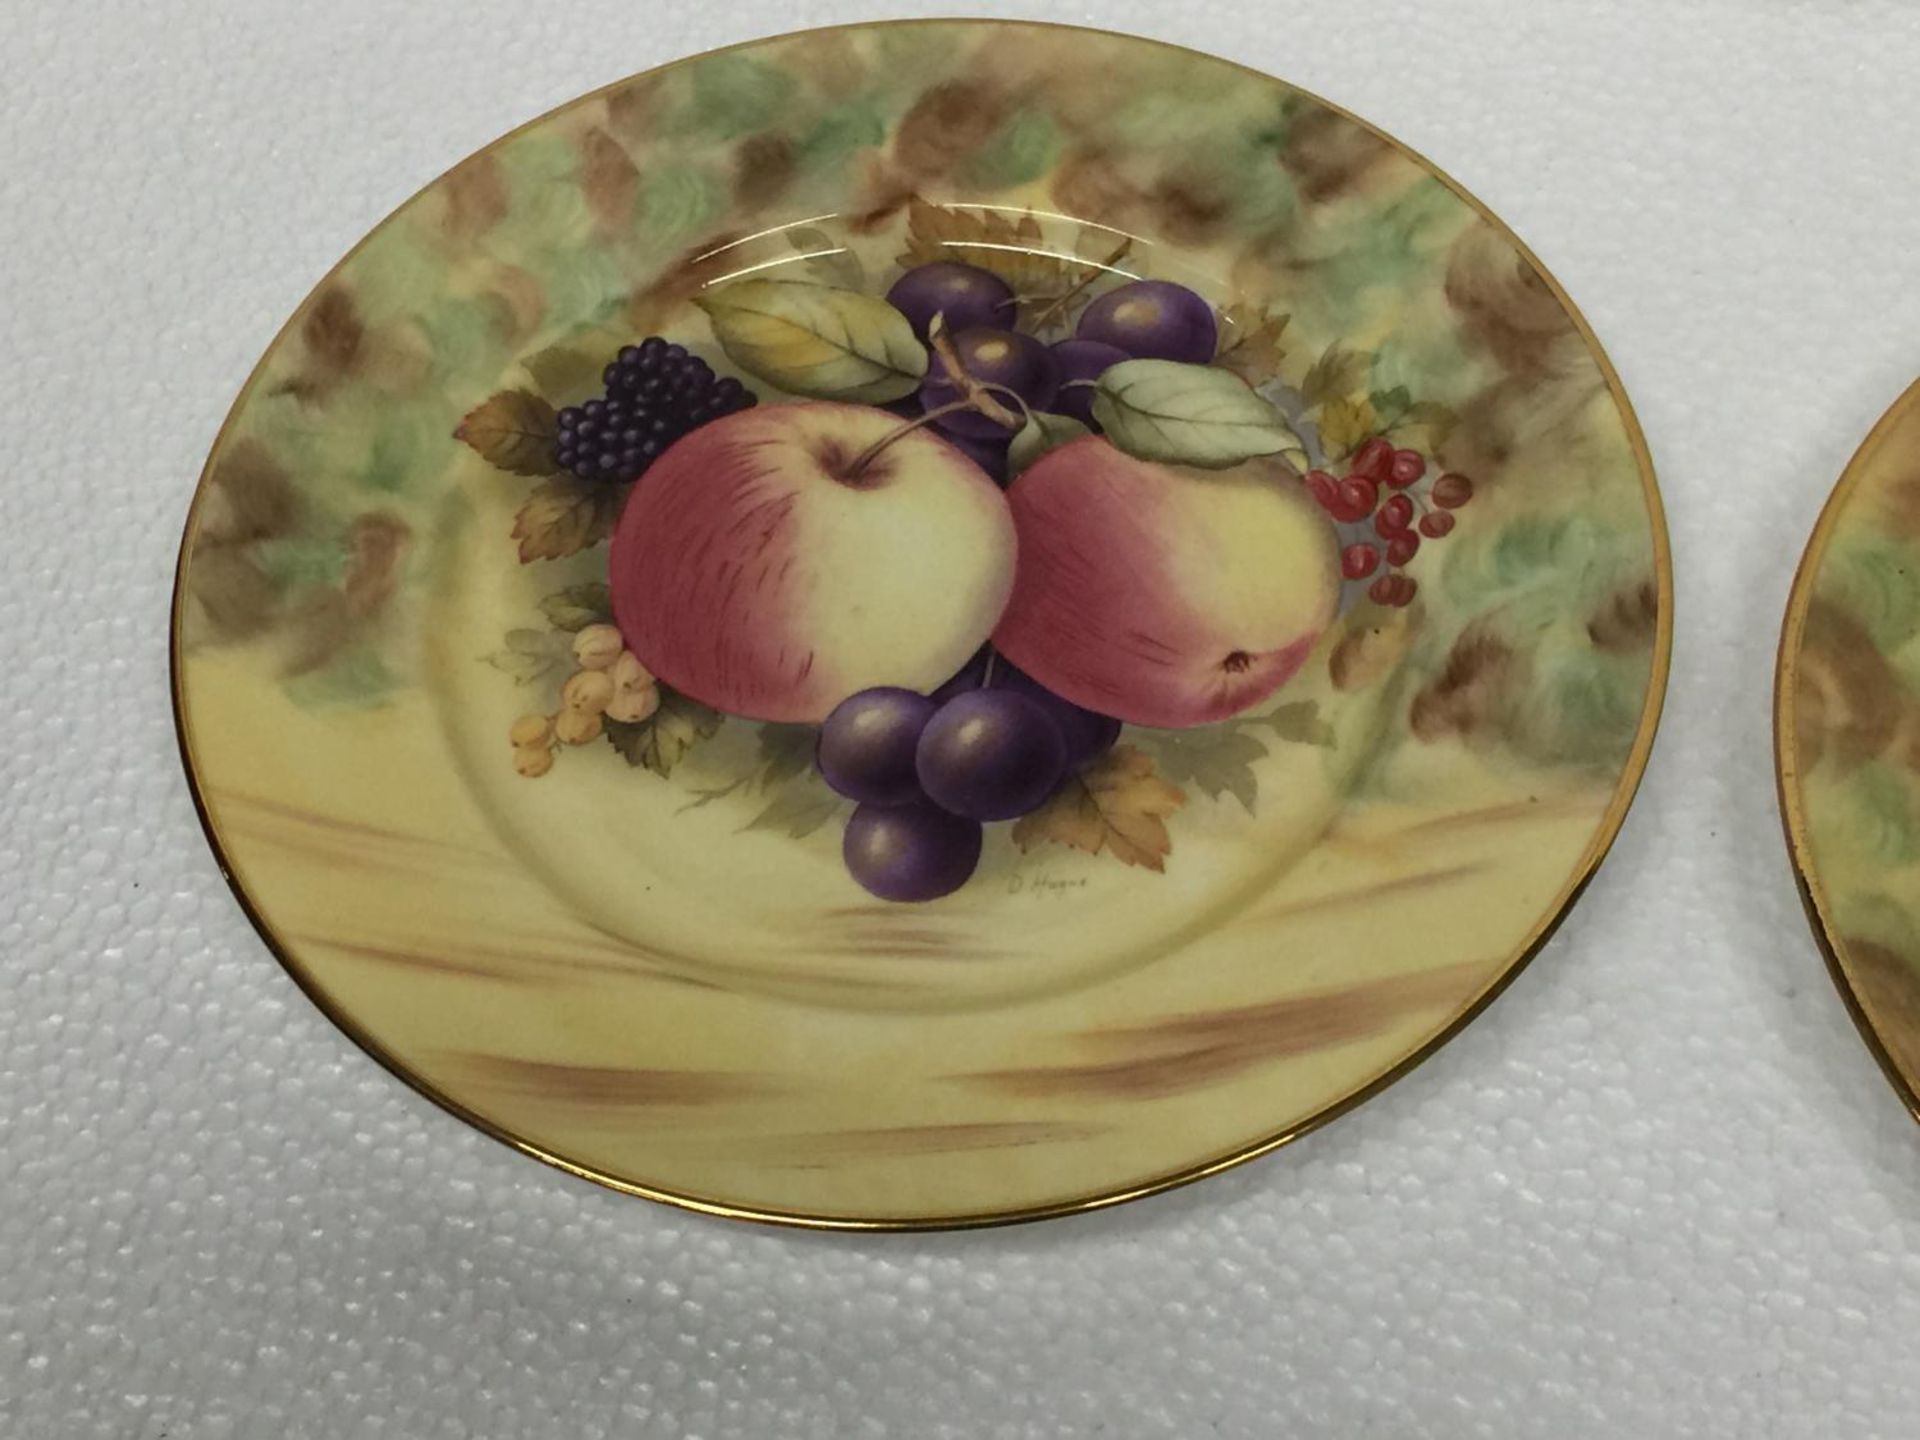 TWO SANDRINGHAM COLLECTORS CABINET PLATES WITH A FRUIT DESIGN - Image 2 of 4